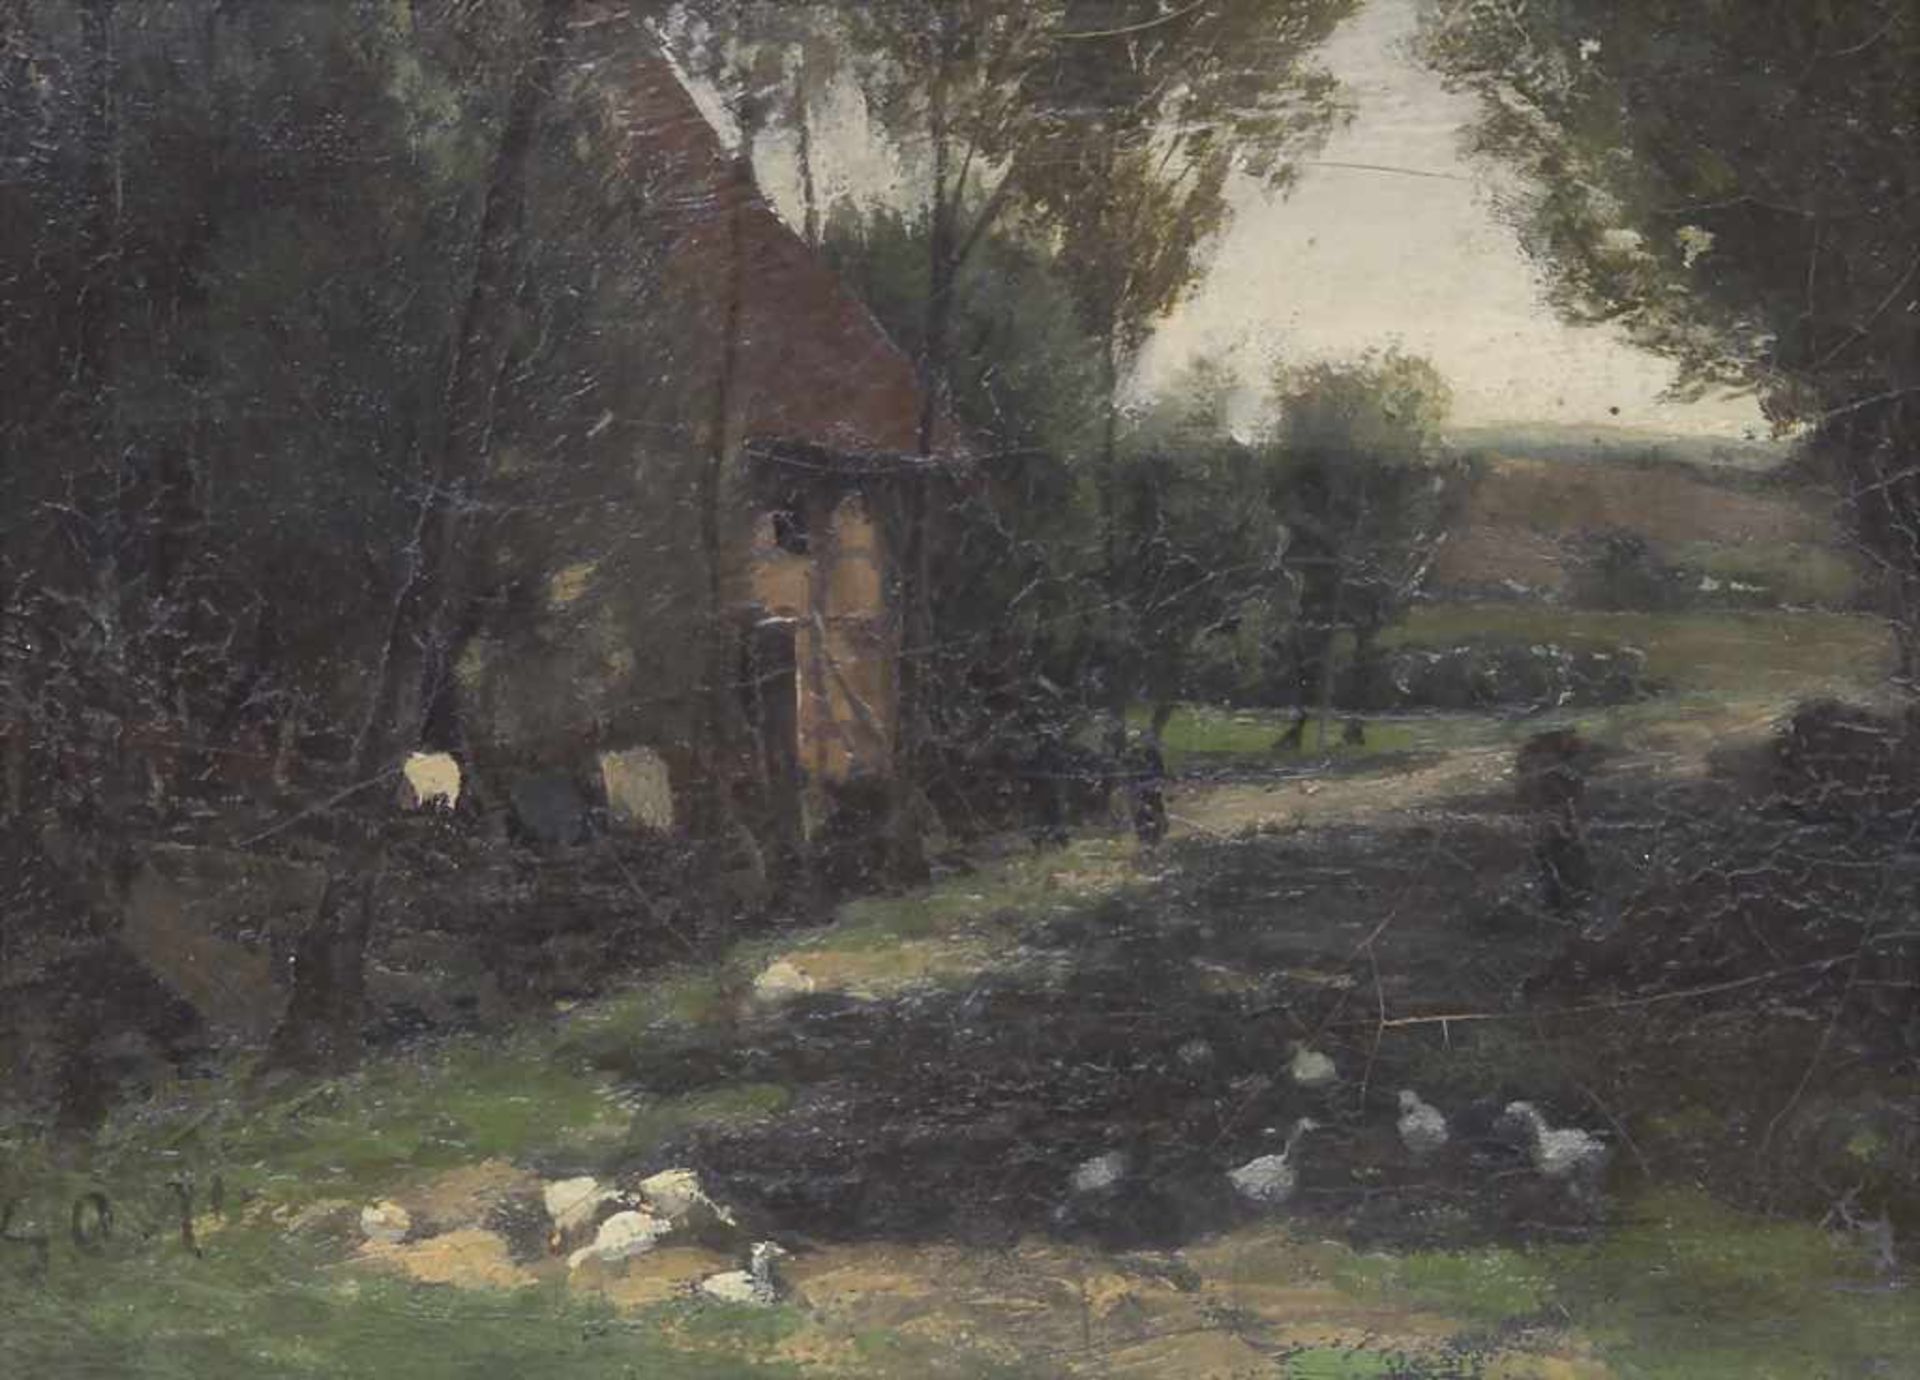 Georg Oeder (1846-1931), 'Bauernhaus am Waldweg' / 'A farm house by the forest path'Te - Image 3 of 6